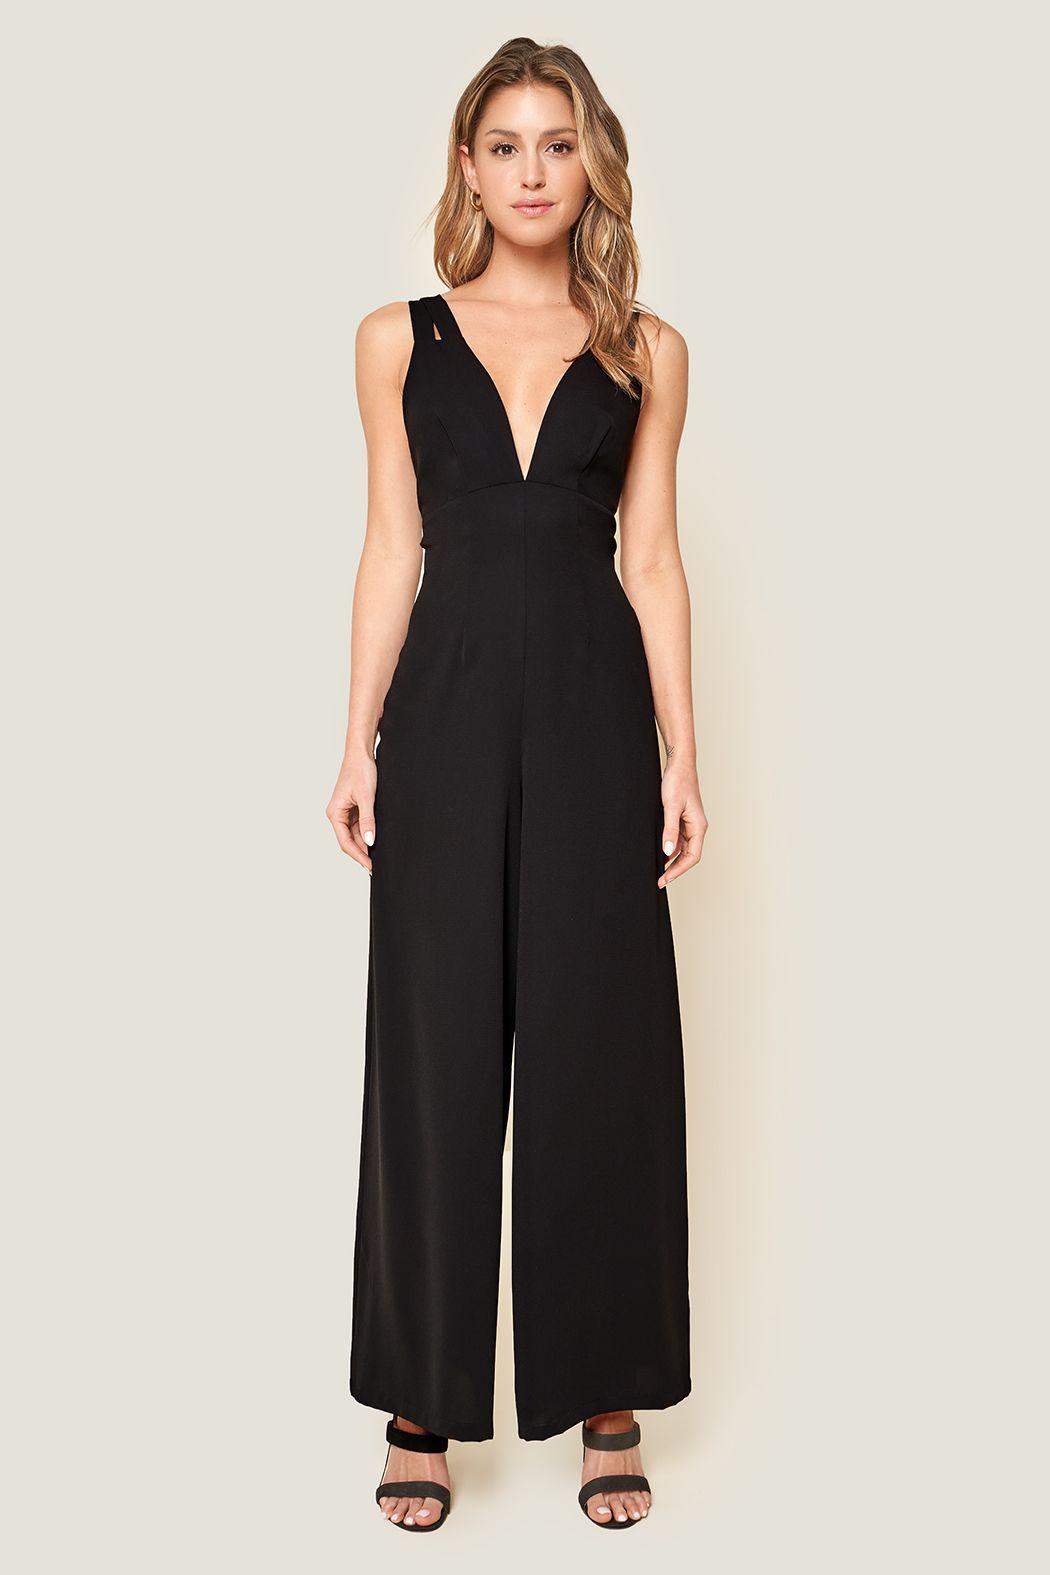 Kim Double Strap Black Jumpsuit from The House of CO-KY - Jumpsuits & Rompers